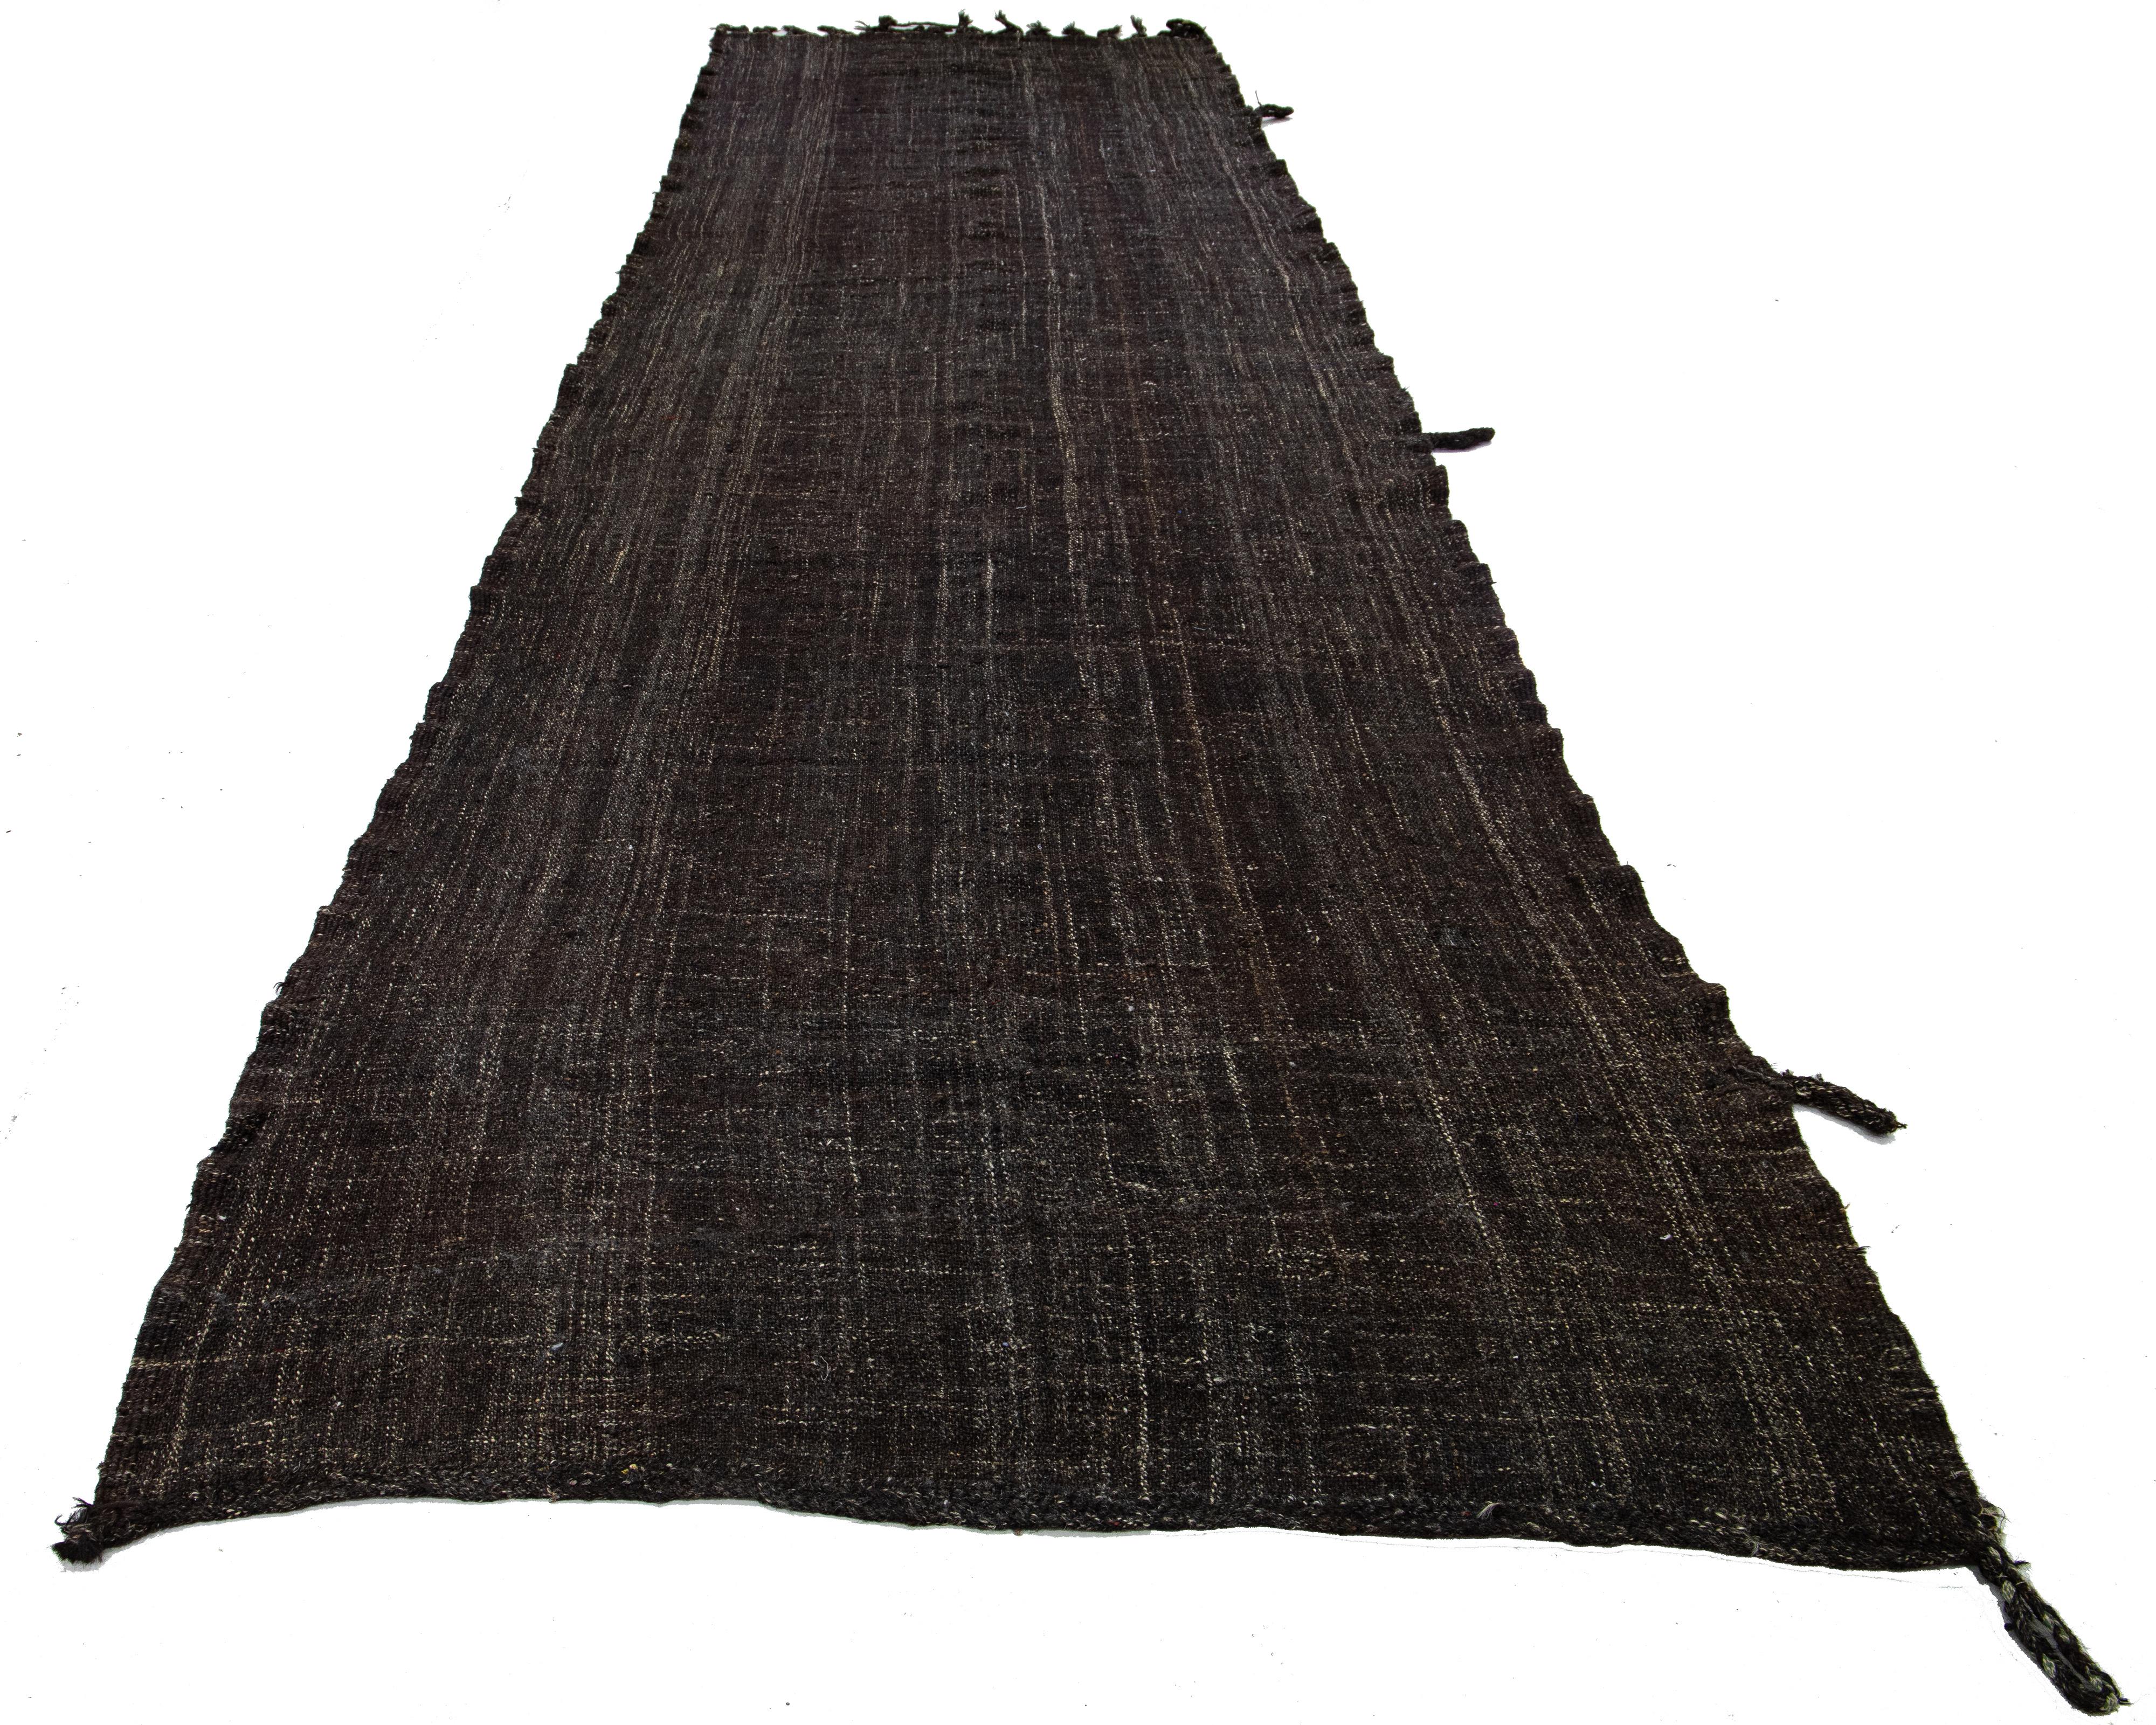 The Deco flatweave wool runner displays a striking dark brown color scheme, contributing to a modern and visually appealing mid-century style crafted with natural materials. 


This rug measures 5'9